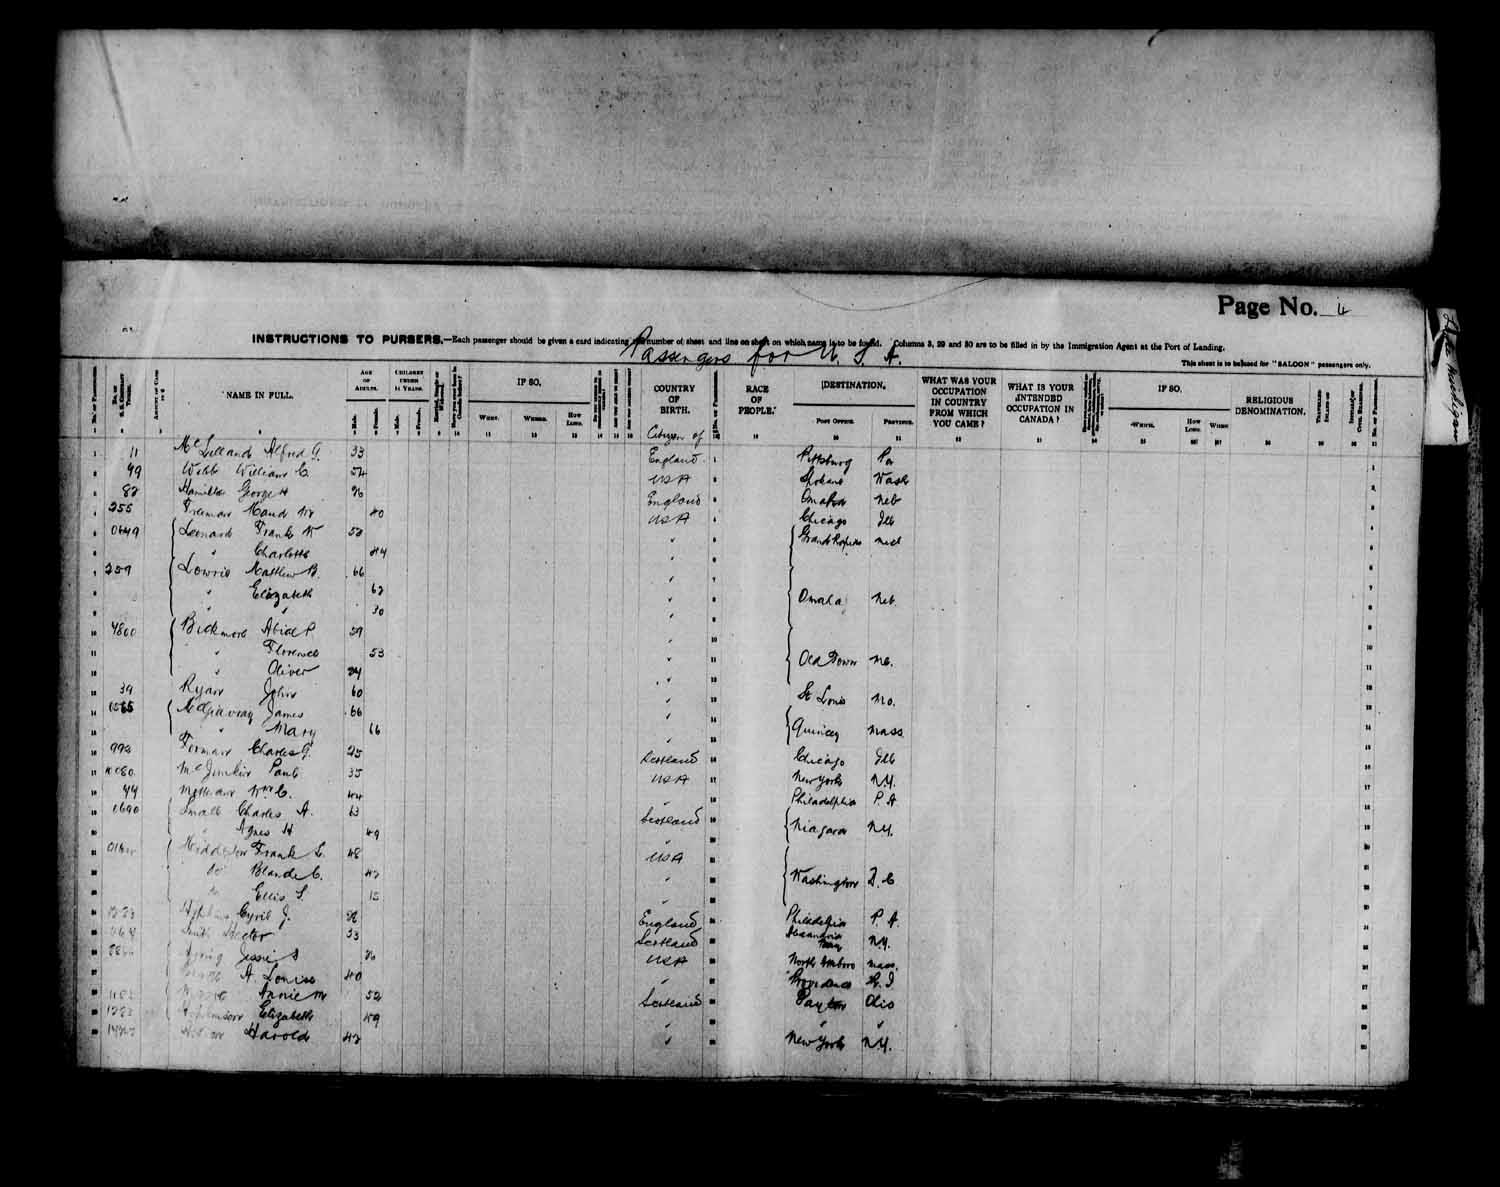 Digitized page of Passenger Lists for Image No.: e003566510